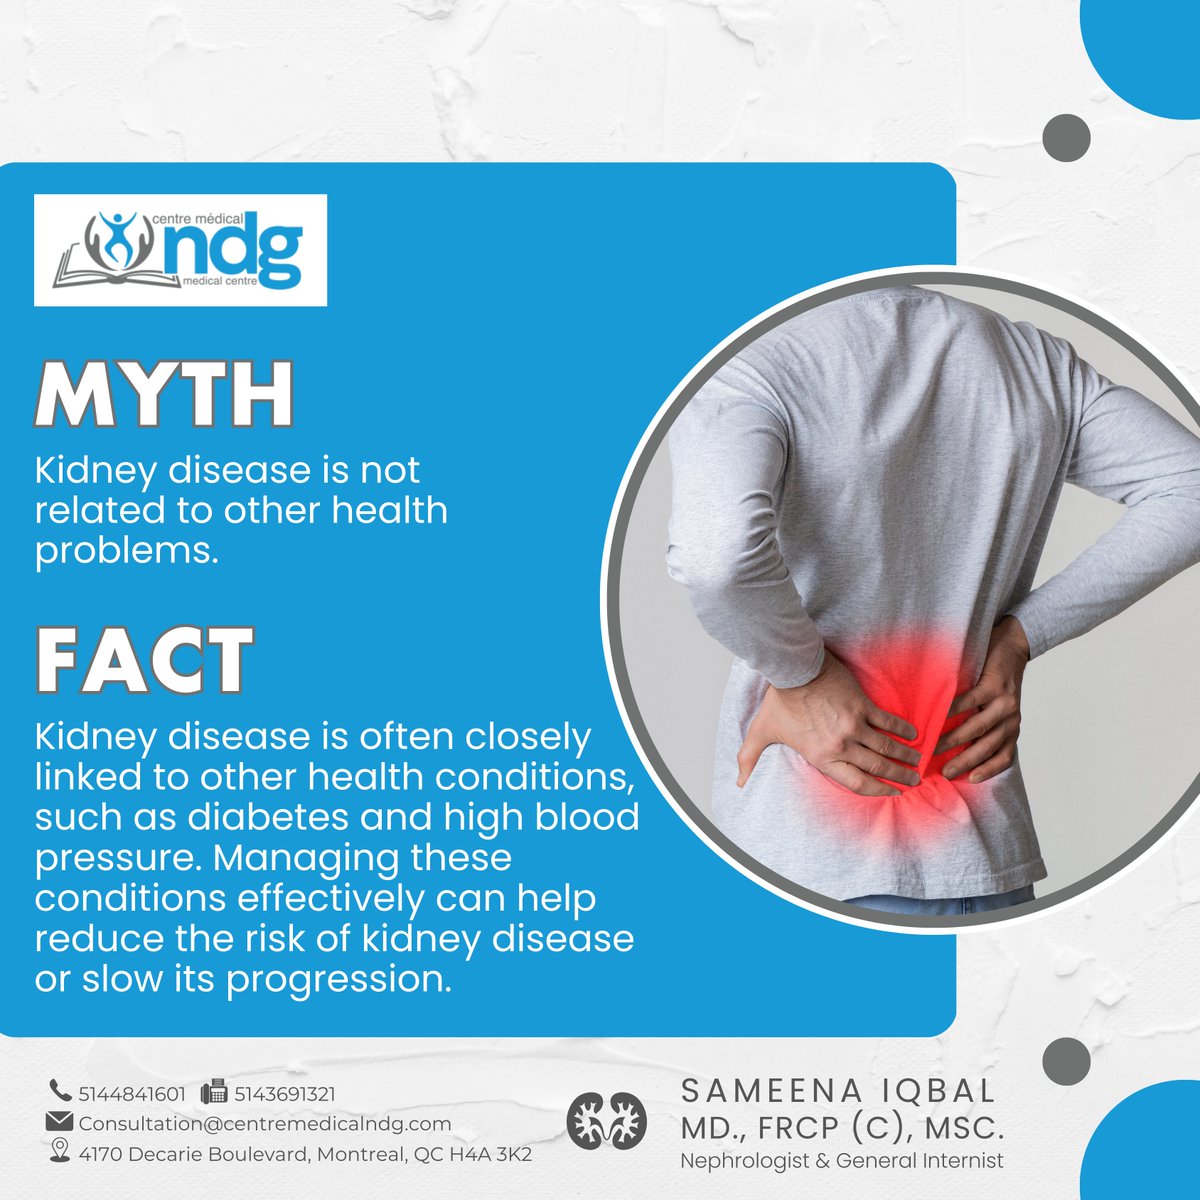 Kidney disease is often connected to other health issues such as diabetes and high blood pressure. Properly managing these conditions is crucial for reducing the risk of kidney disease or slowing its progression.
#KidneyHealth #DiabetesManagement #Hypertension #PreventativeCare